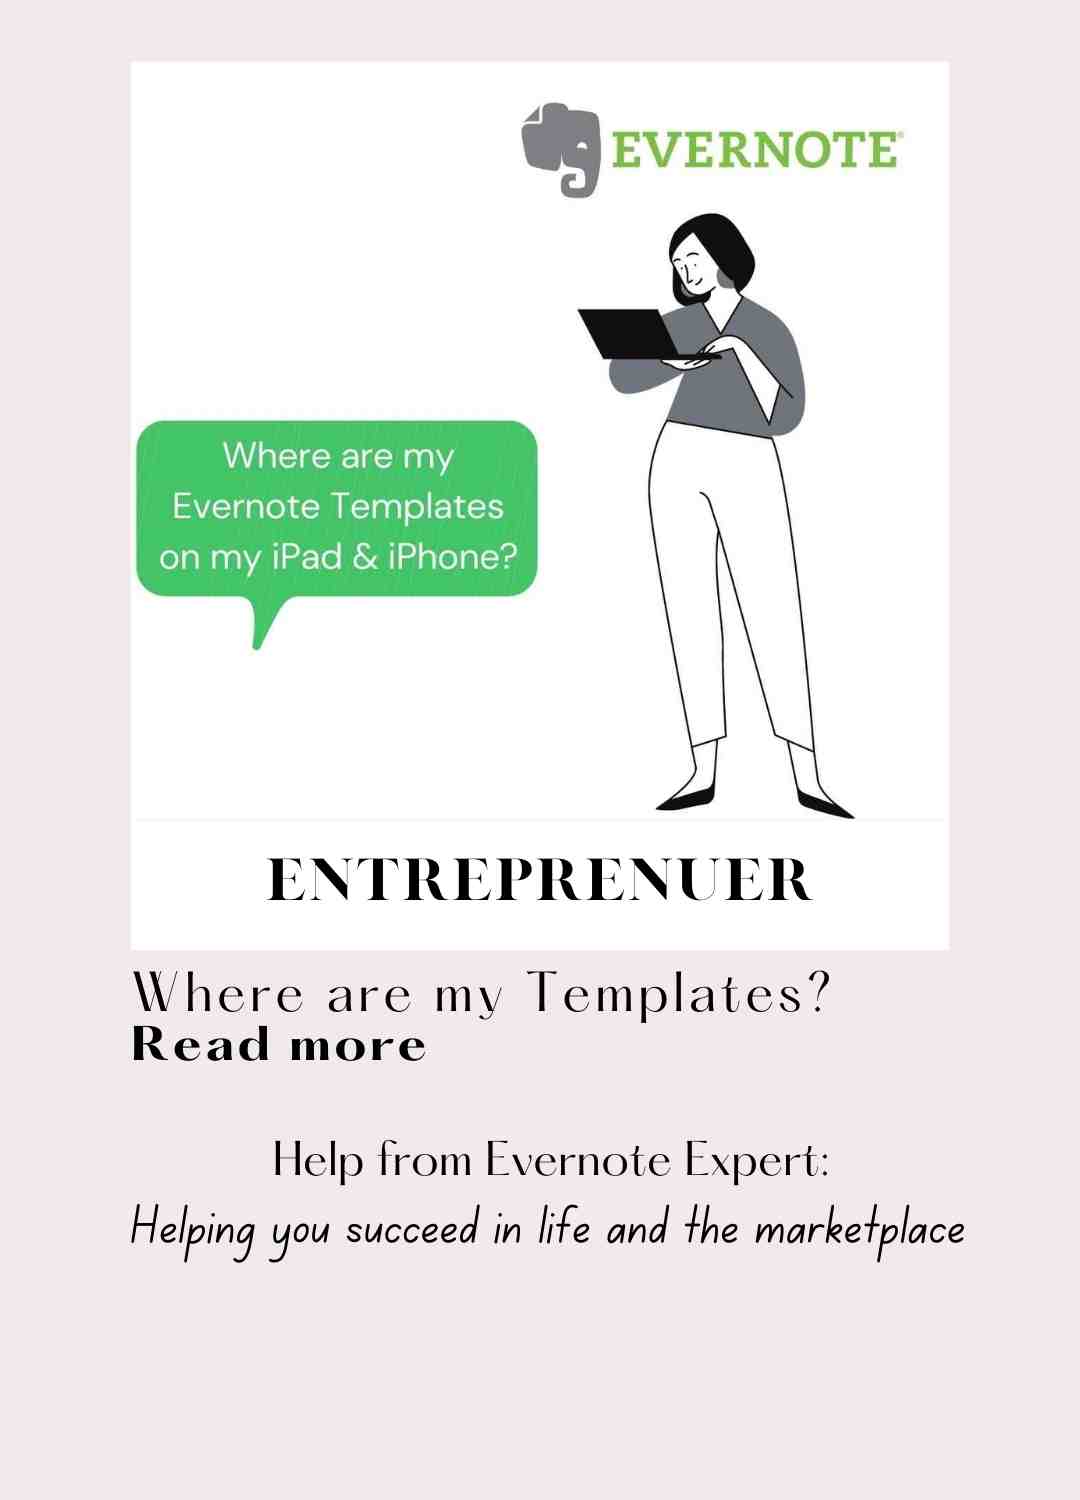 Where are my Evernote templates on iOS device